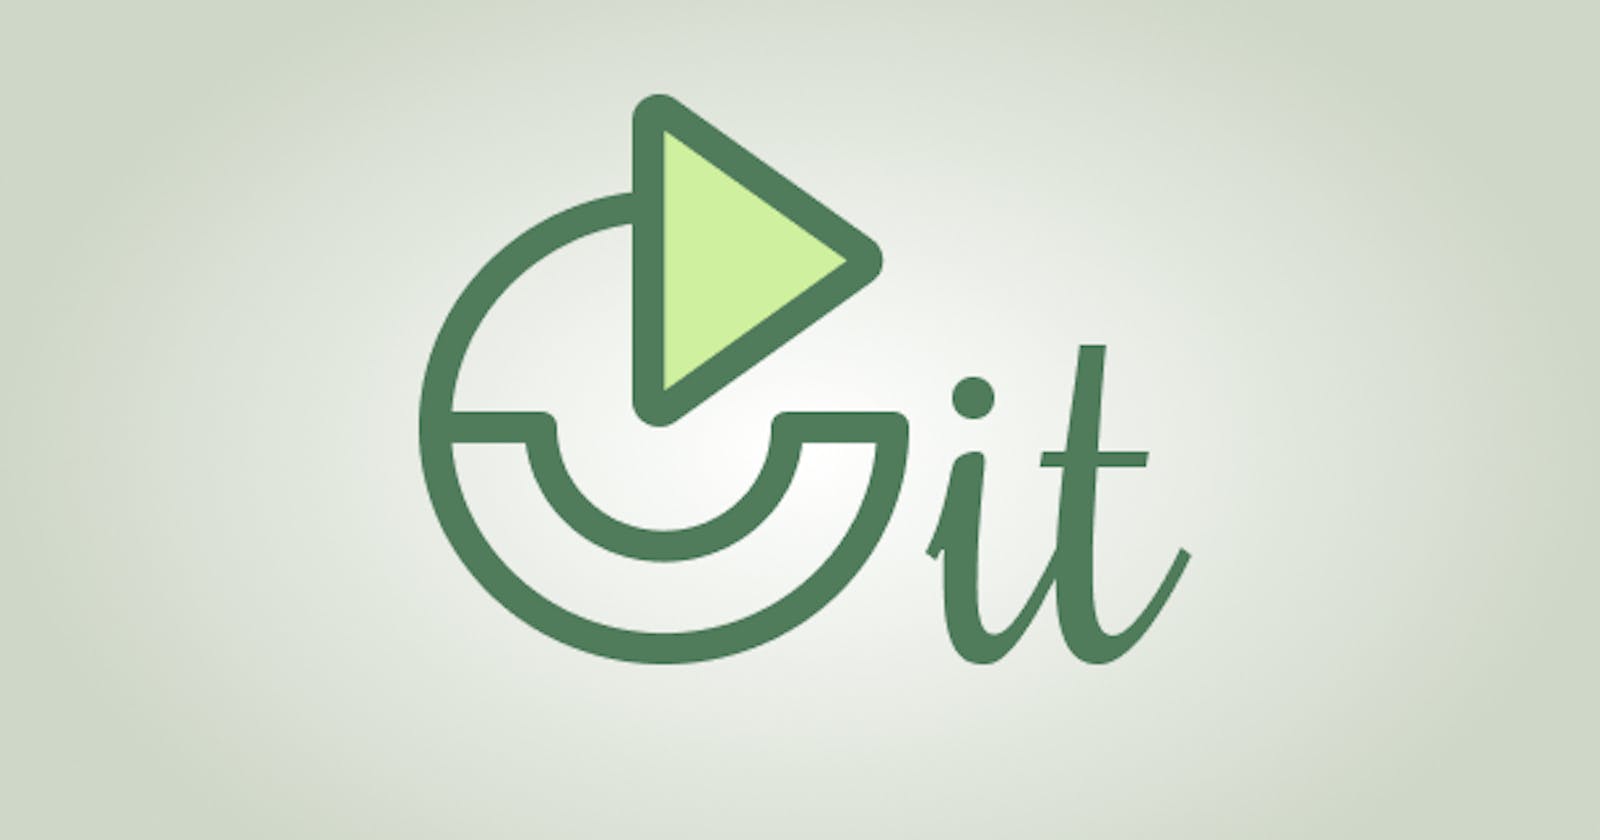 Reset, Revert and Checkout in Git